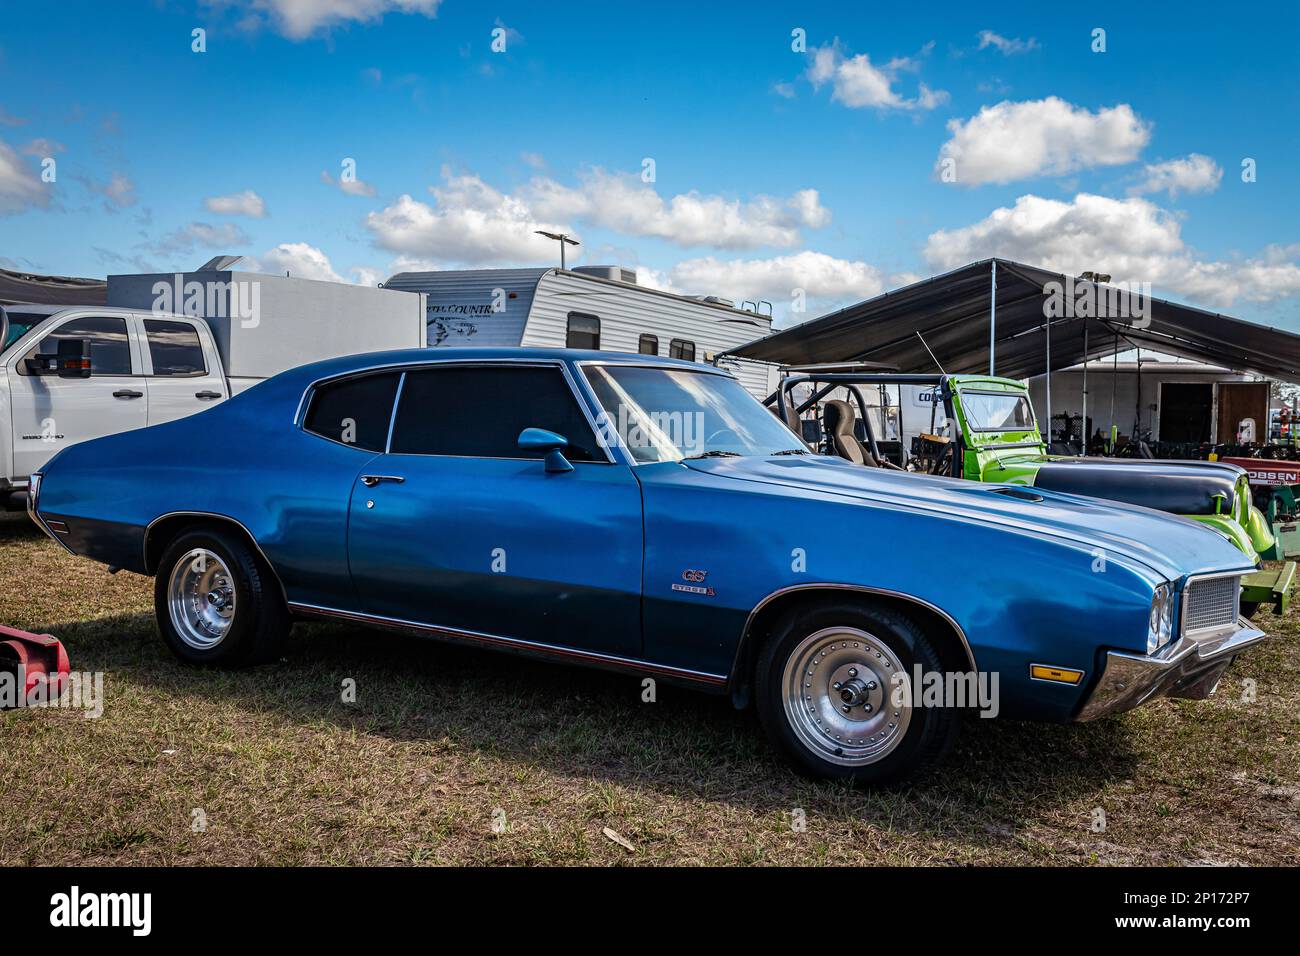 Fort Meade, FL - February 24, 2022: High perspective side view of a 1970 Buick GS 455 Stage 1 Coupe at a local car show. Stock Photo